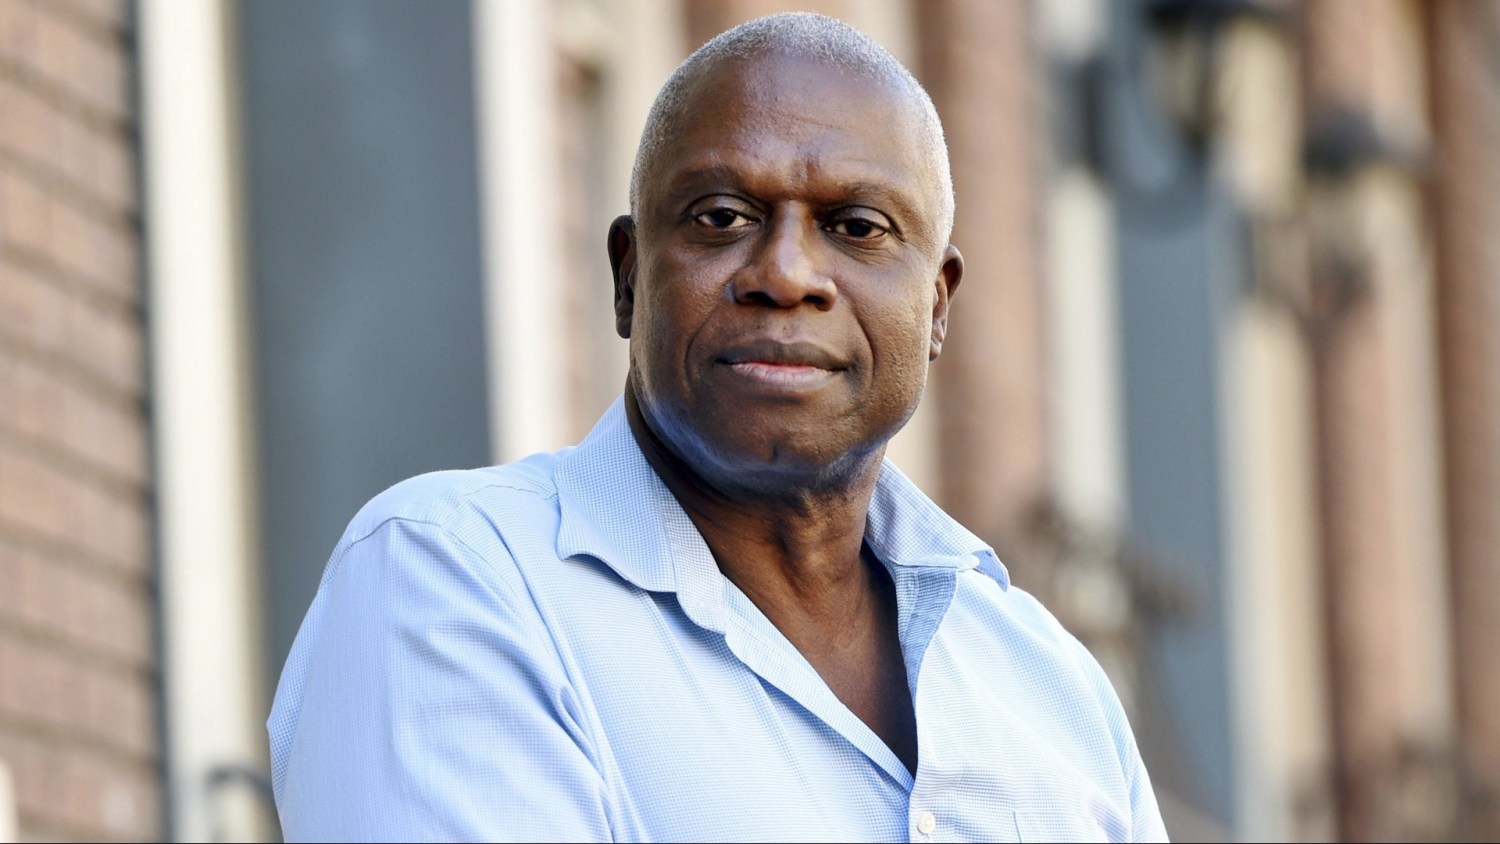 Andre Braugher, ‘Brooklyn Nine-Nine’ and ‘Homicide: Life on the Street’ actor, dead at 61 (nbcnews.com)